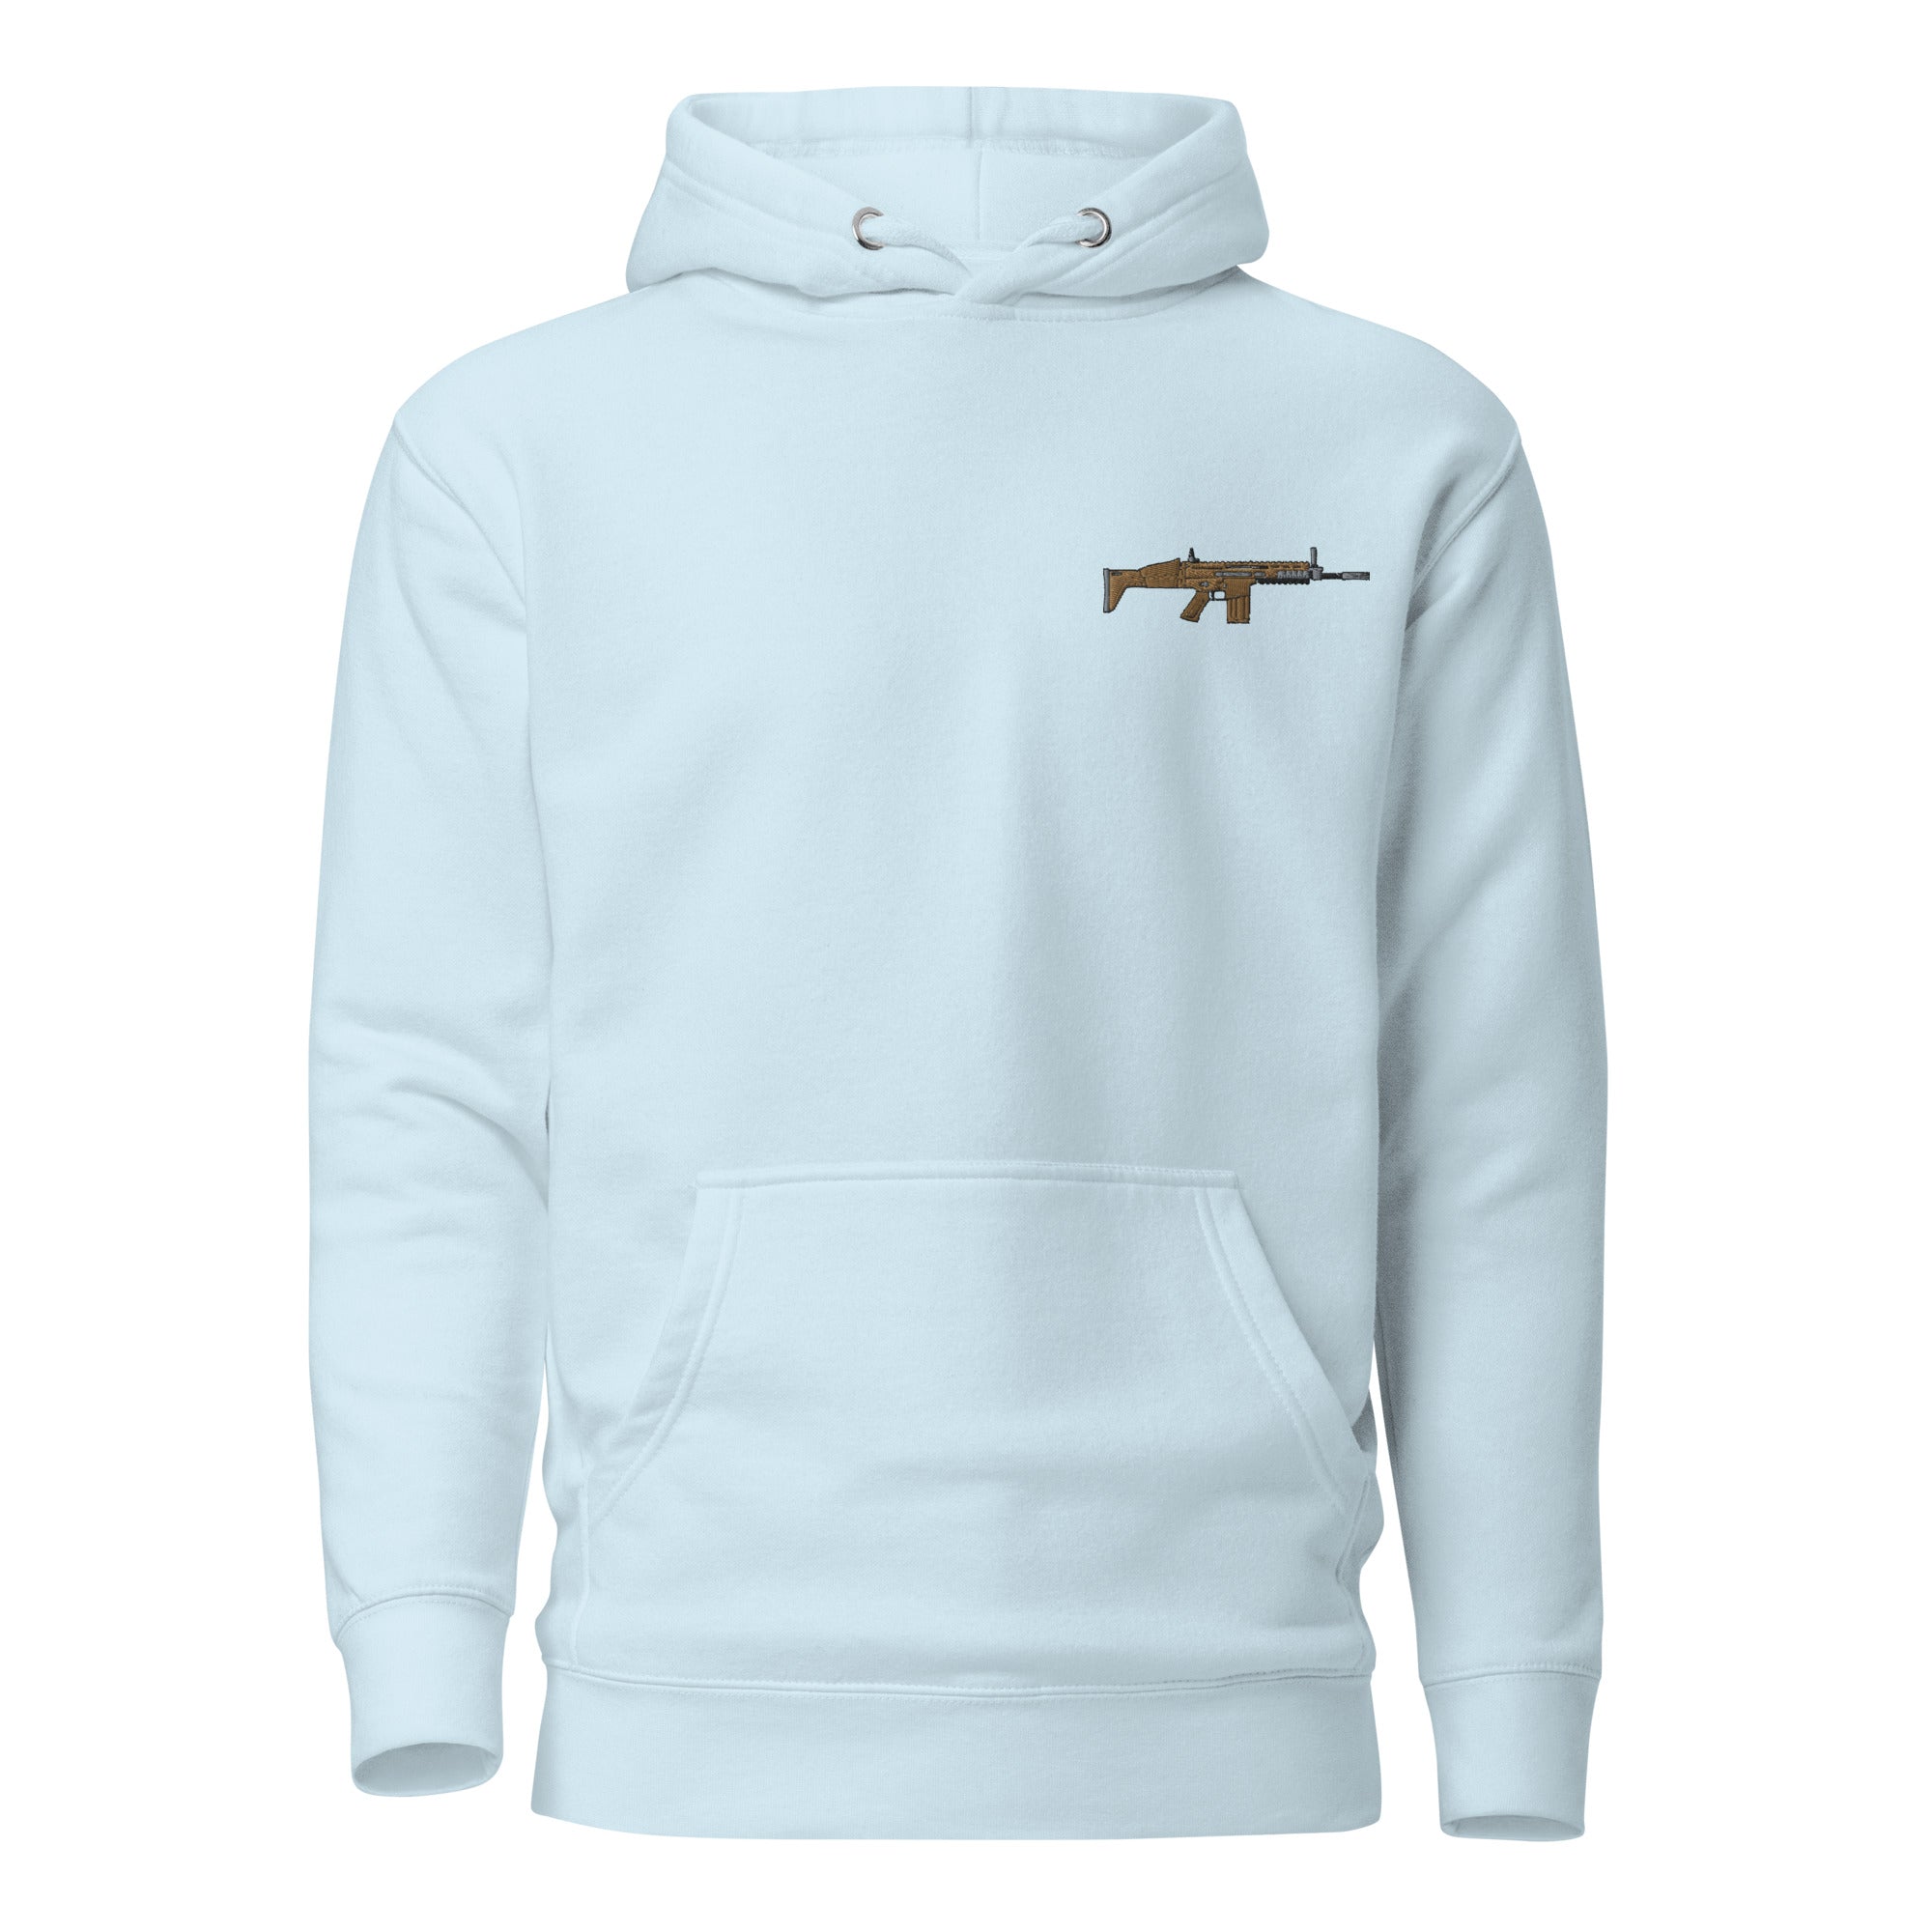 SCAR Embroidered Rifle Unisex Hoodie